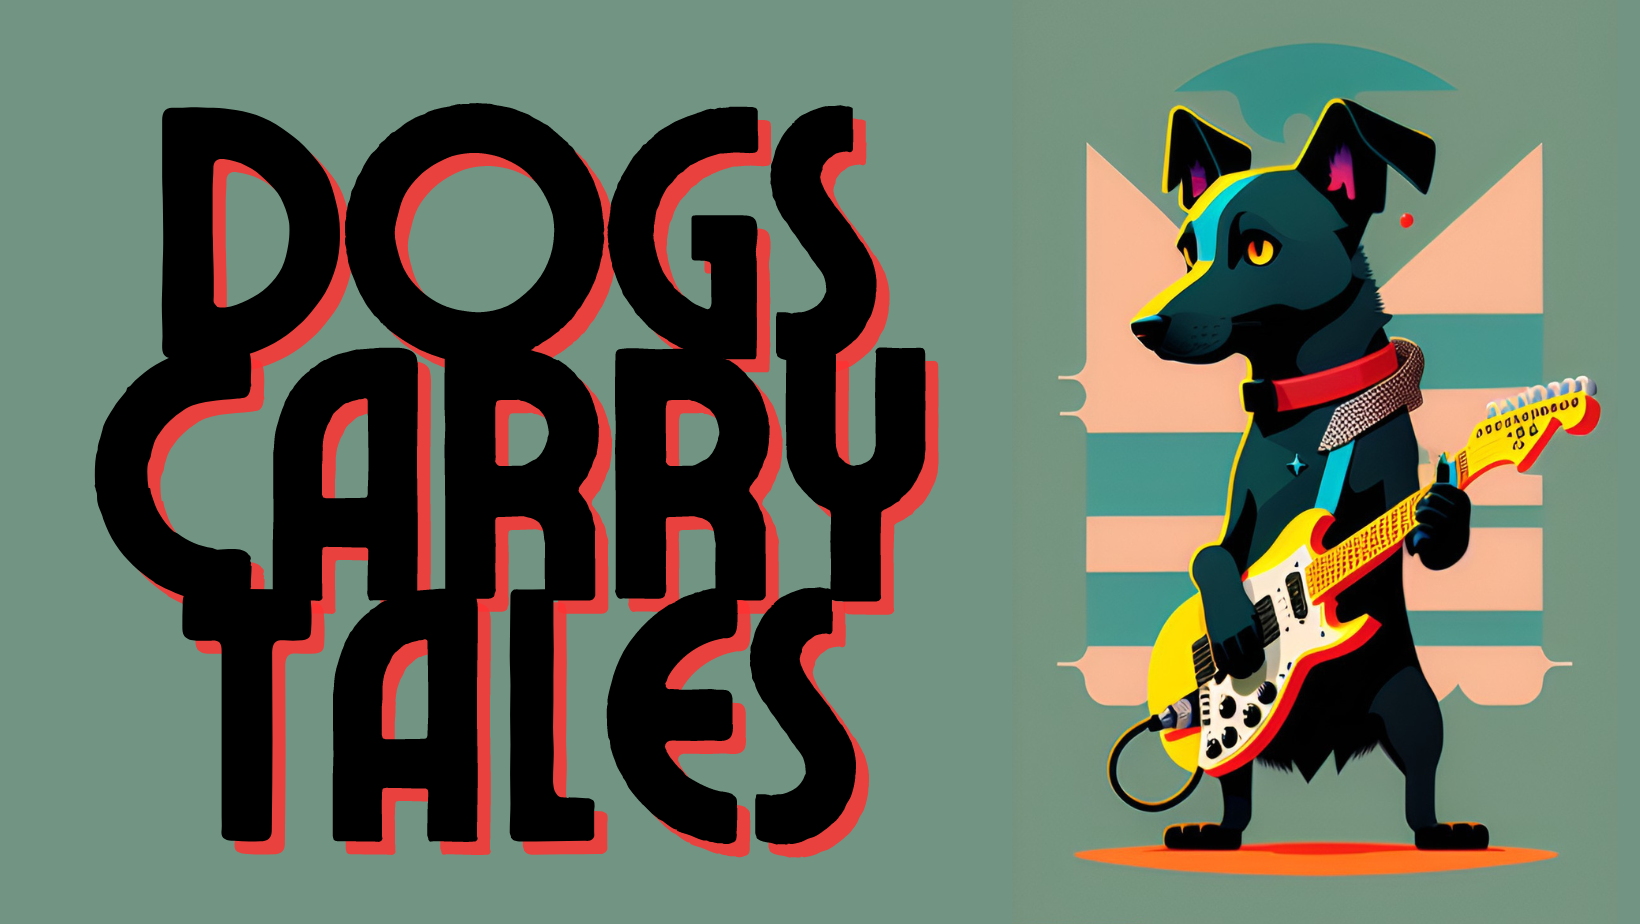 Dogs Carry Tales